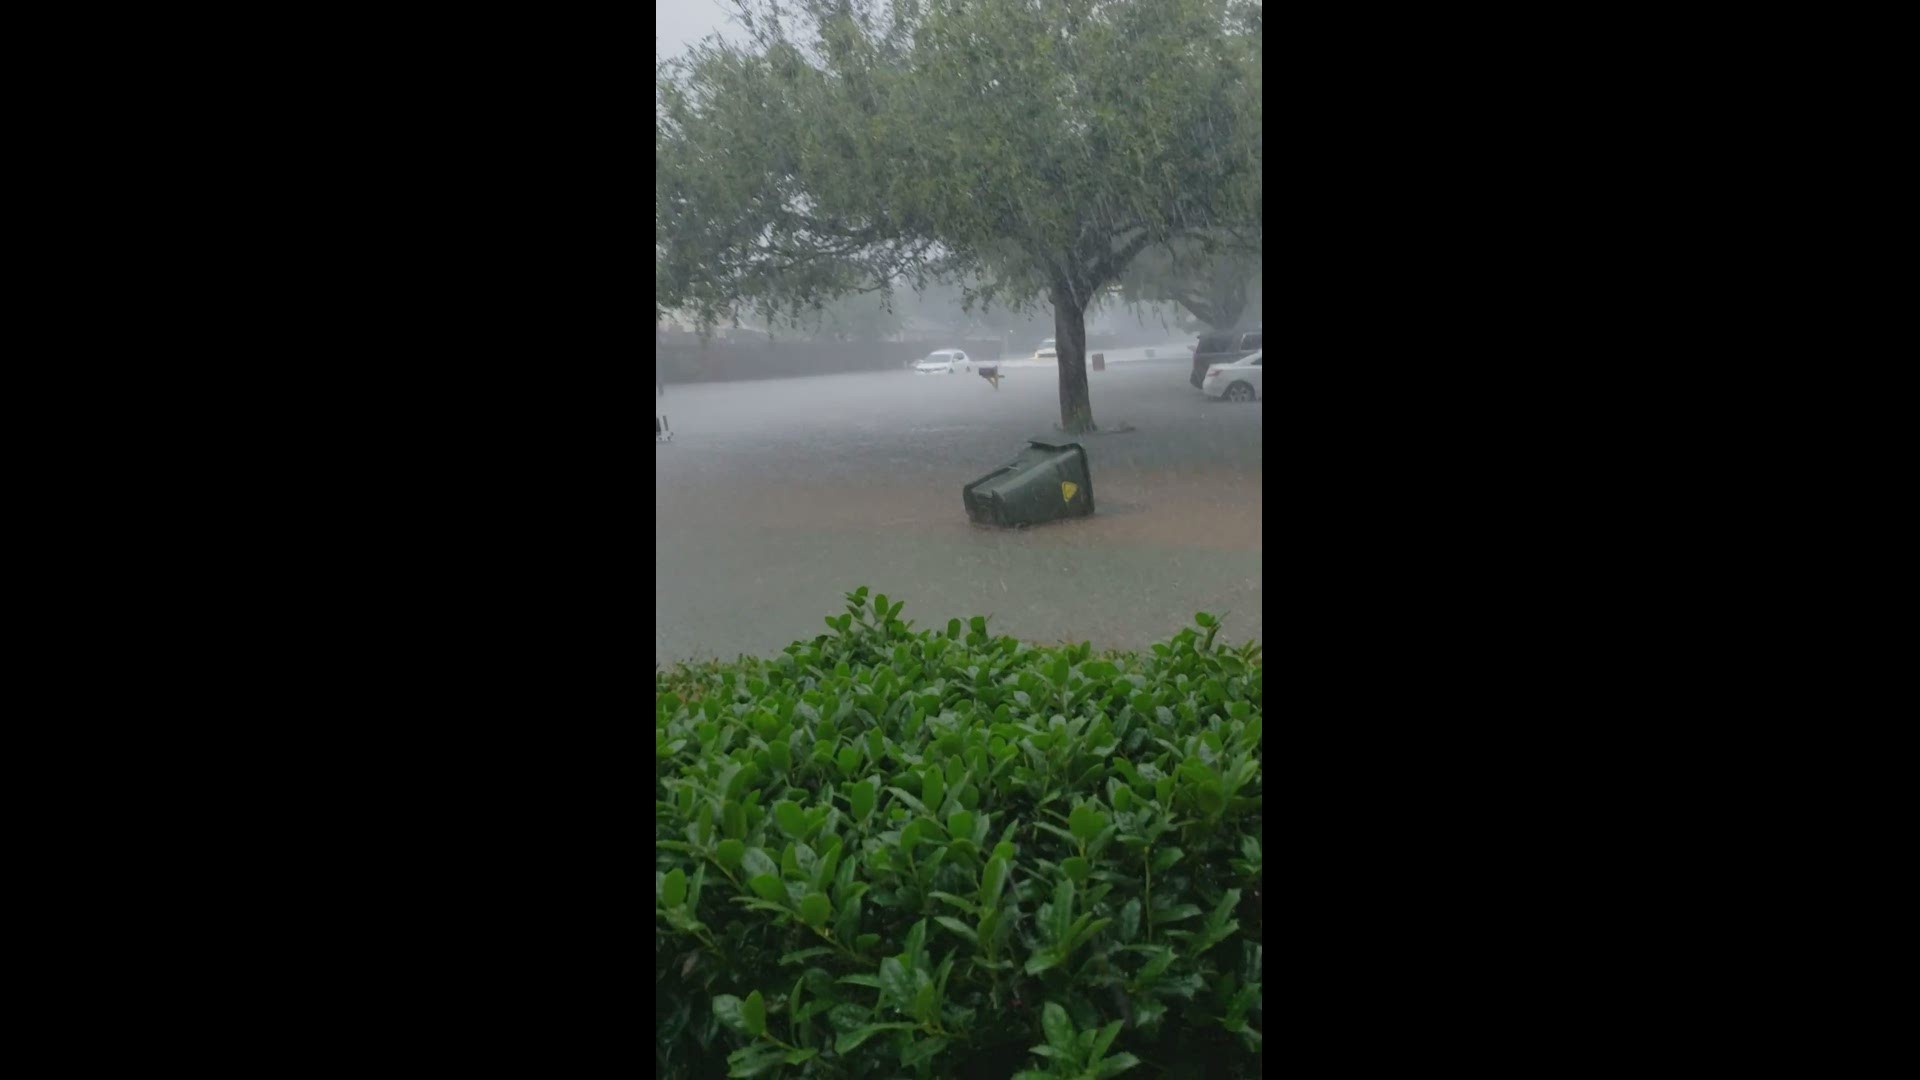 Thanks to Patty in Bacliff for this video of a pickup driver making waves on a flooded street. This is never a good idea.